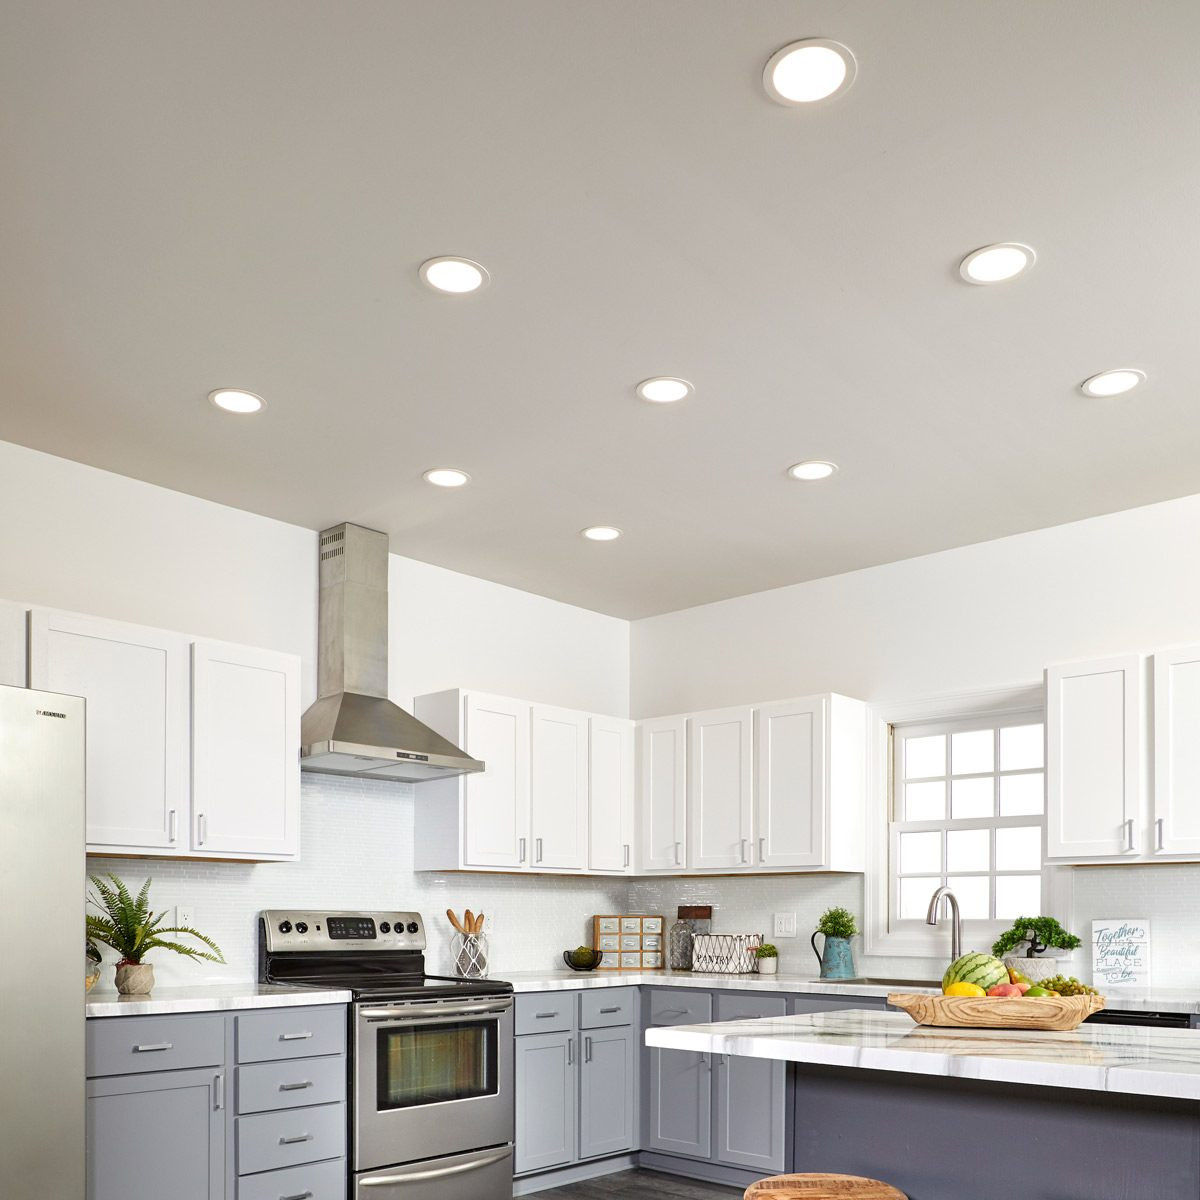 Kitchen Led Lights
 How to Install Low Profile LED Lights in Your Kitchen